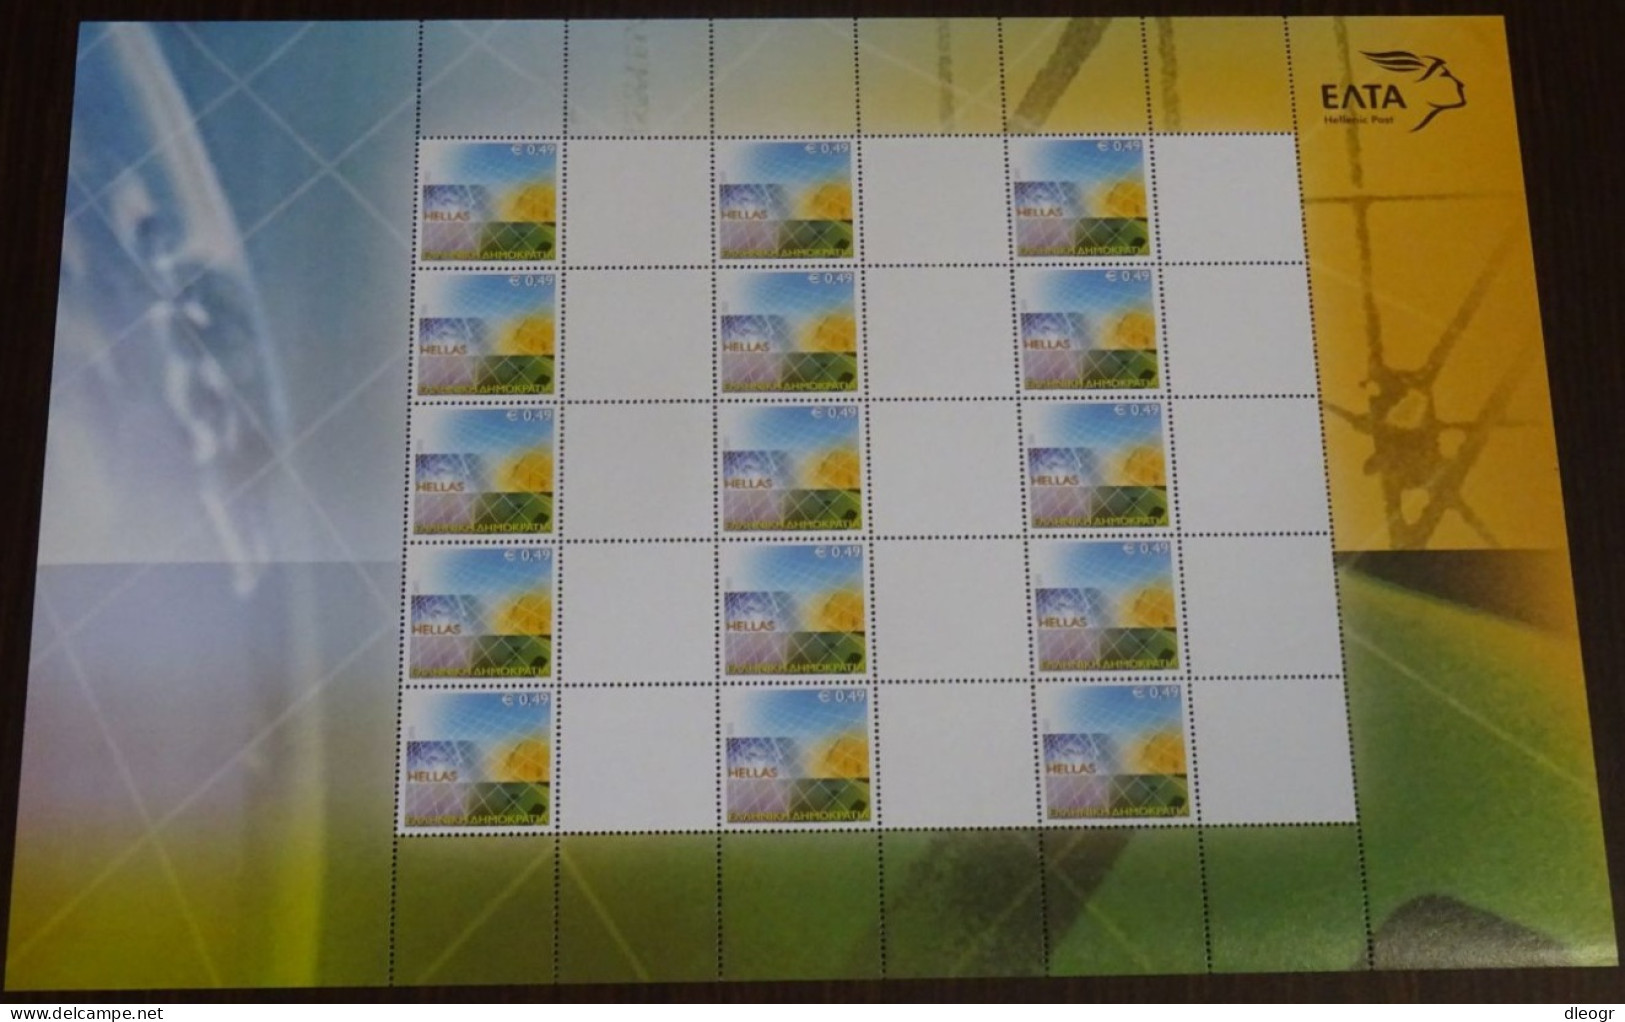 Greece 2005 Personalized Stamps Rare SET of 8 Sheets with Blank Labels MNH